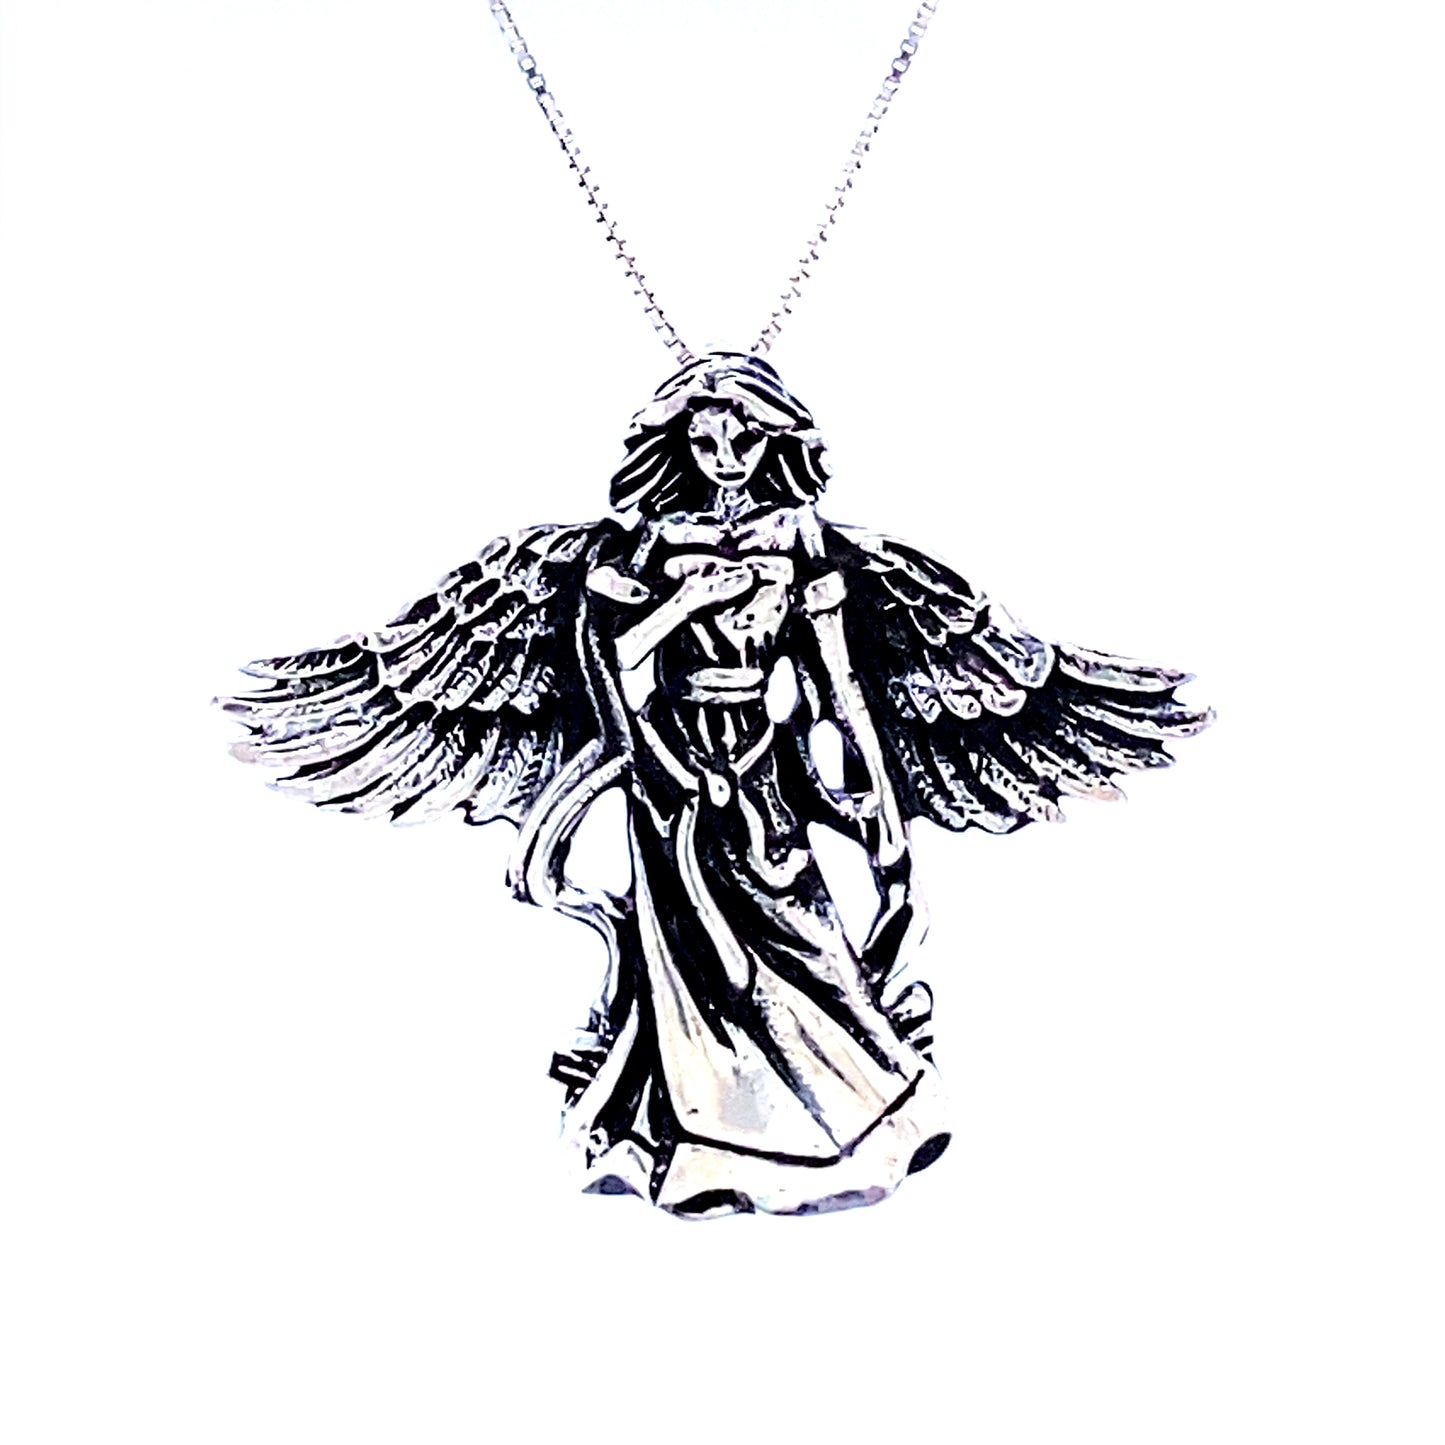 A Super Silver Flowing Angel Pendant With Hand Over Heart with wings on a necklace.